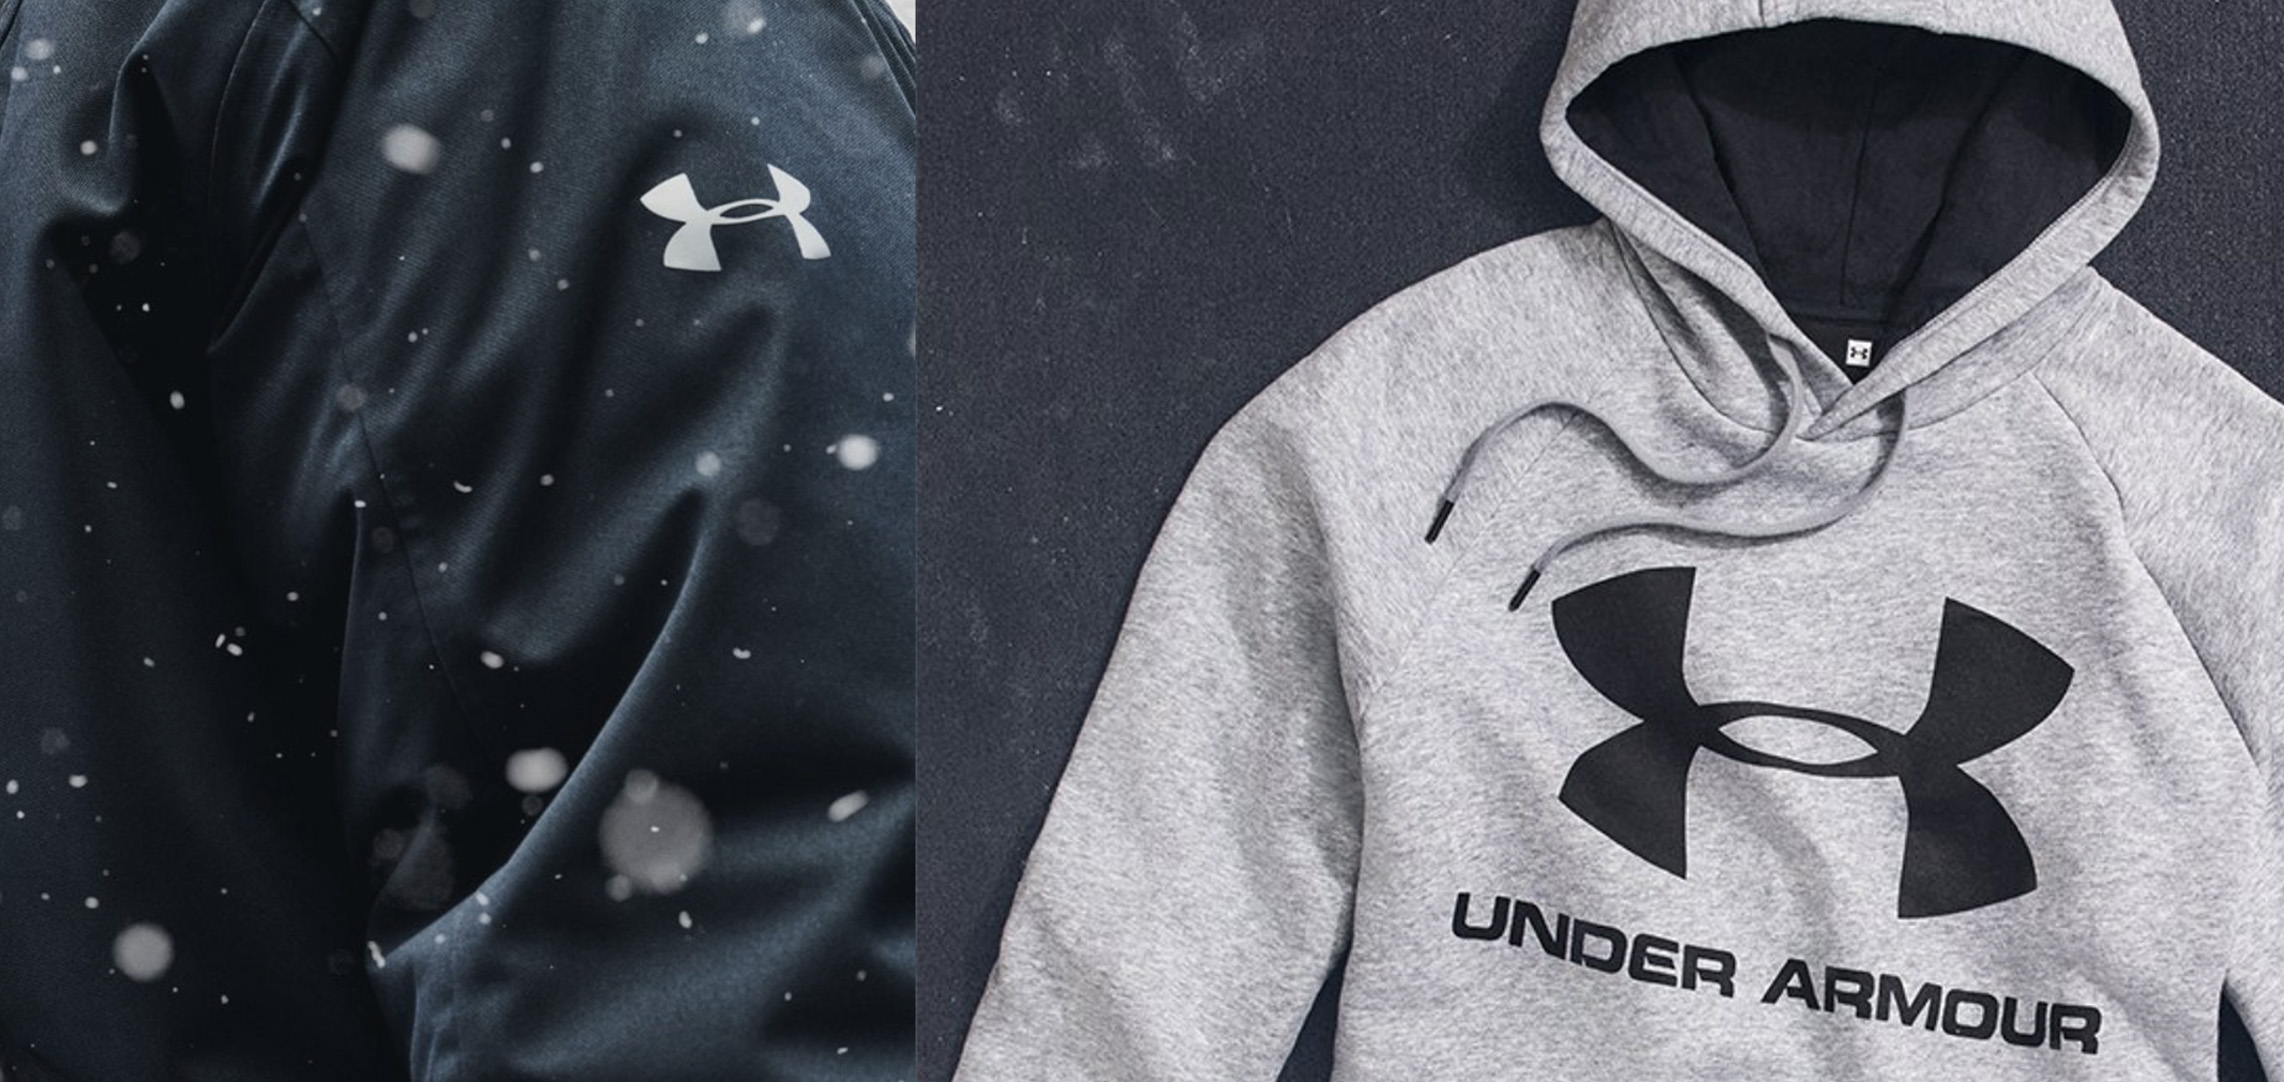 off in Under Armour's Friends \u0026 Family 